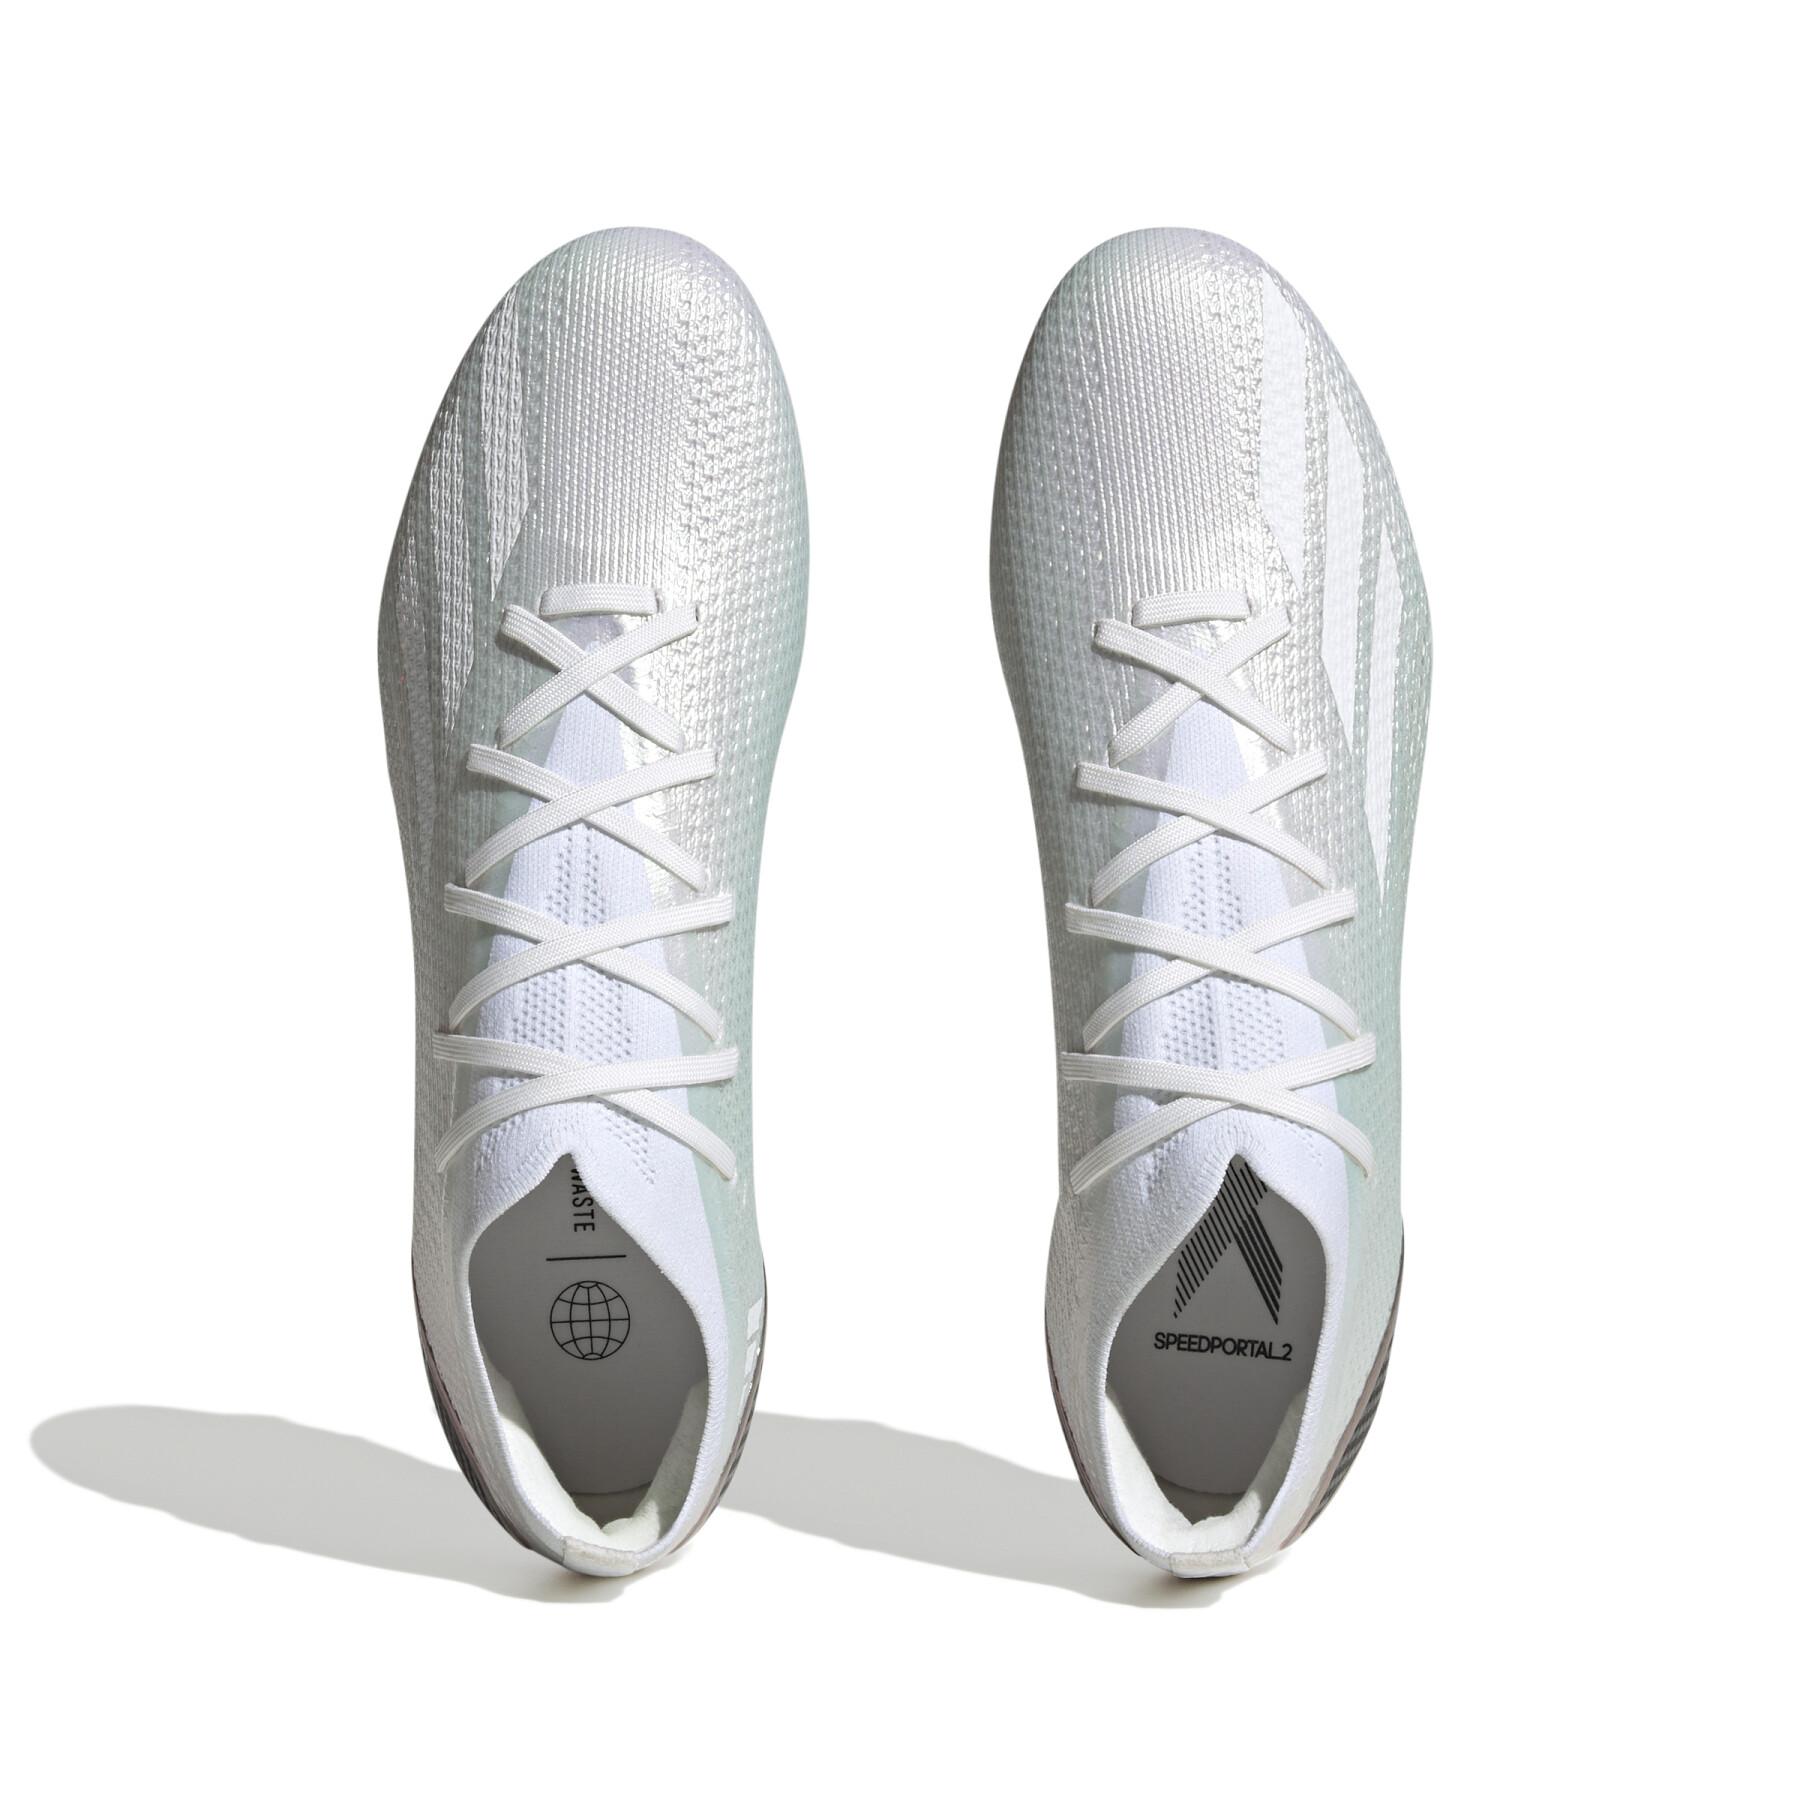 Soccer shoes adidas X Speedportal.2 Fg - Pearlized Pack